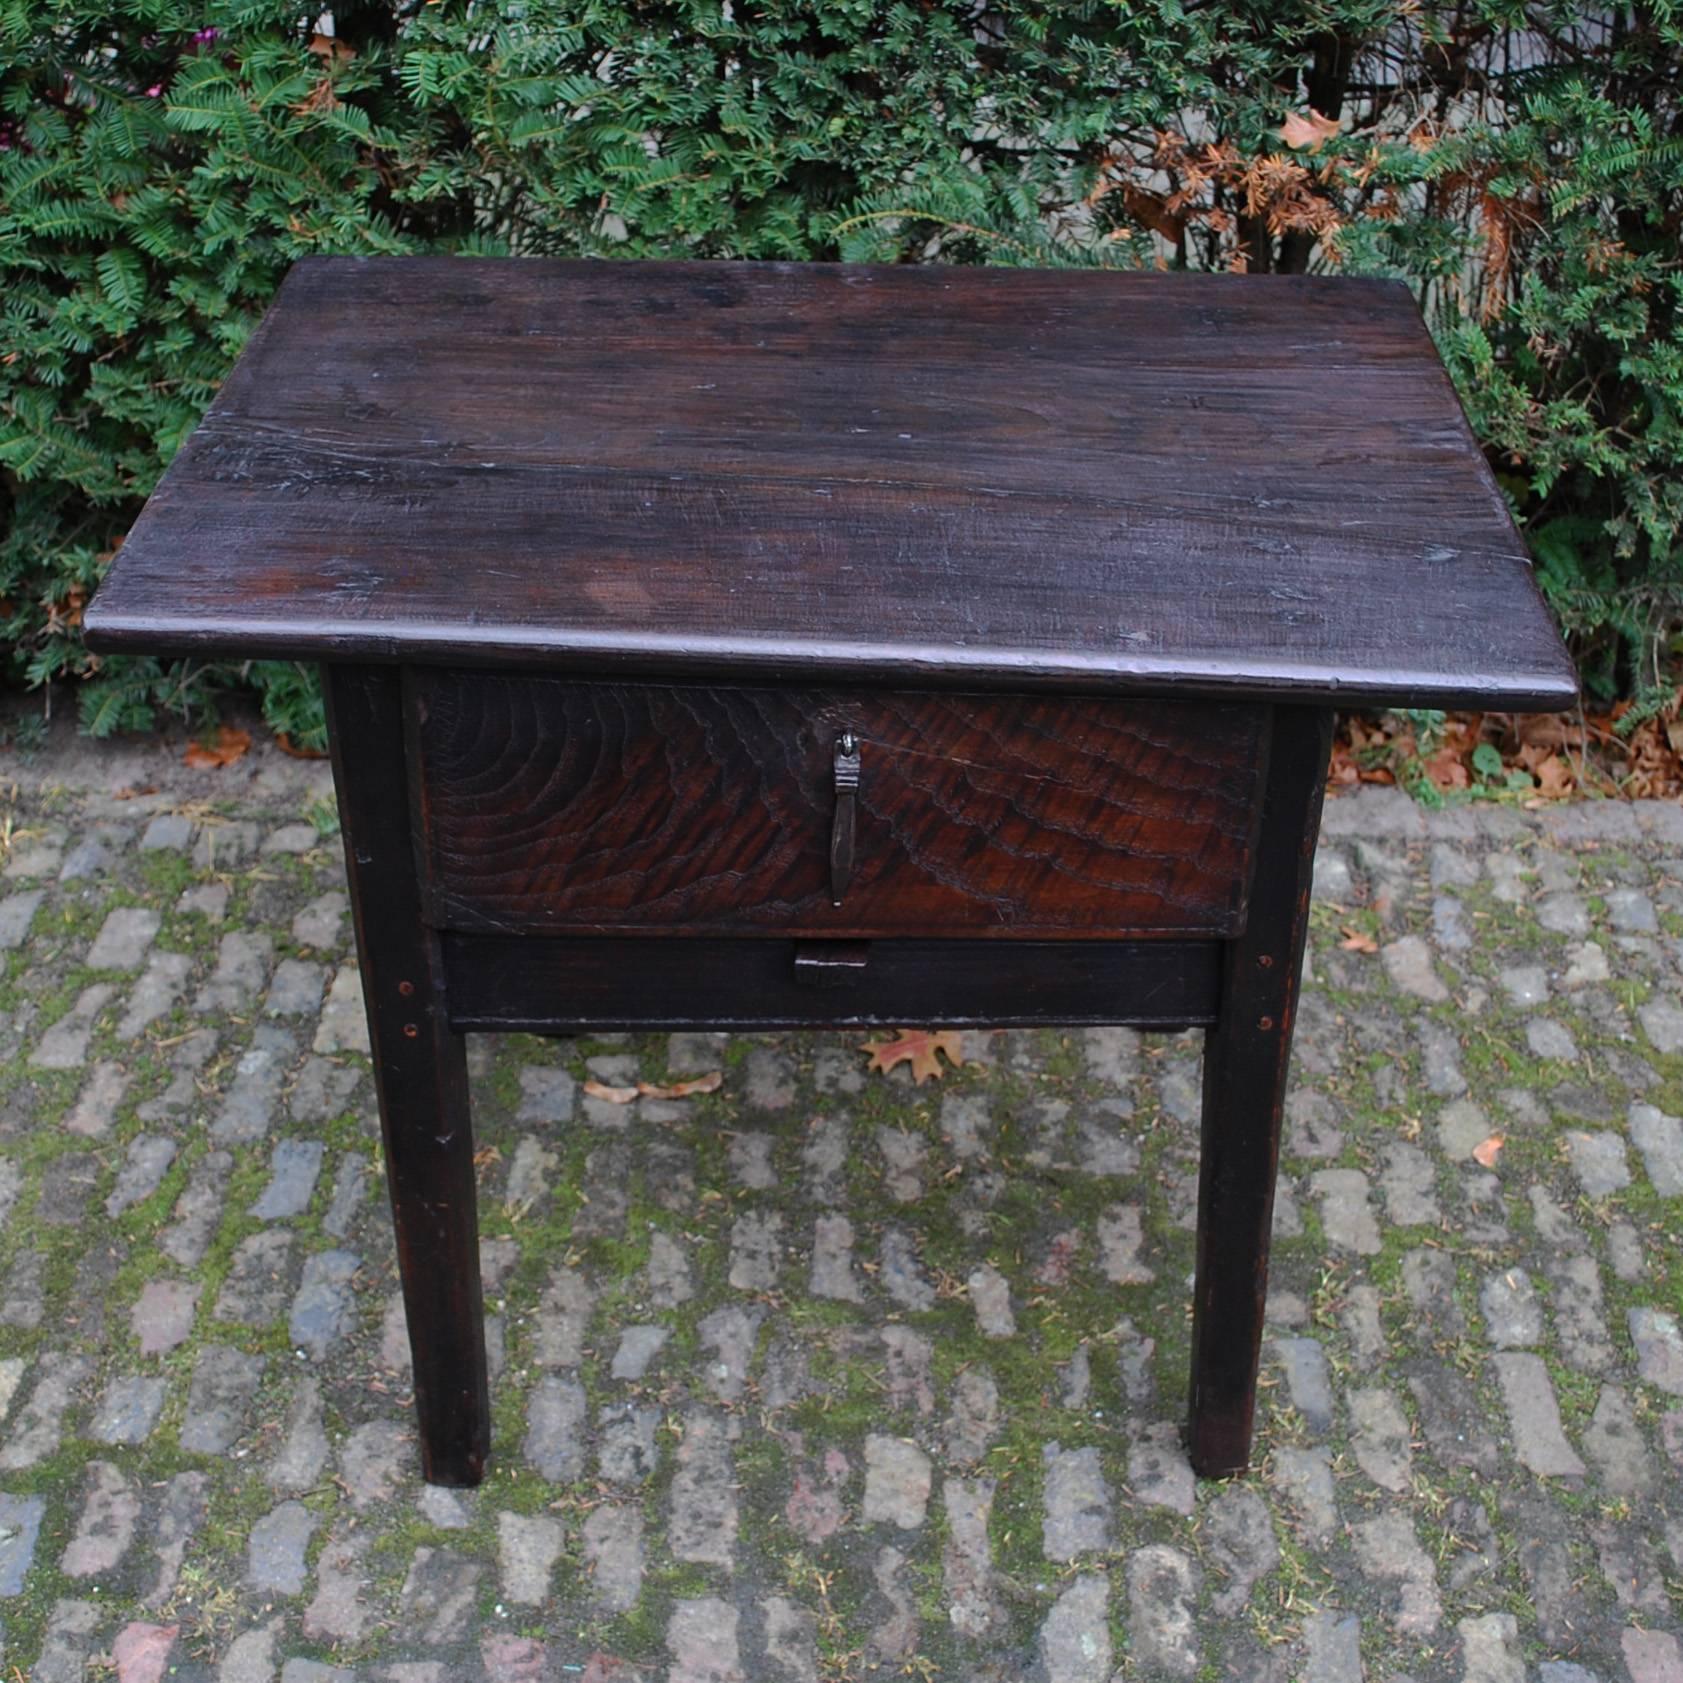 Early 19th century primitive low table / coffee table with one drawer.
Originates Spain, dating circa 1800.
(shipping costs on request, depends on destination).
 